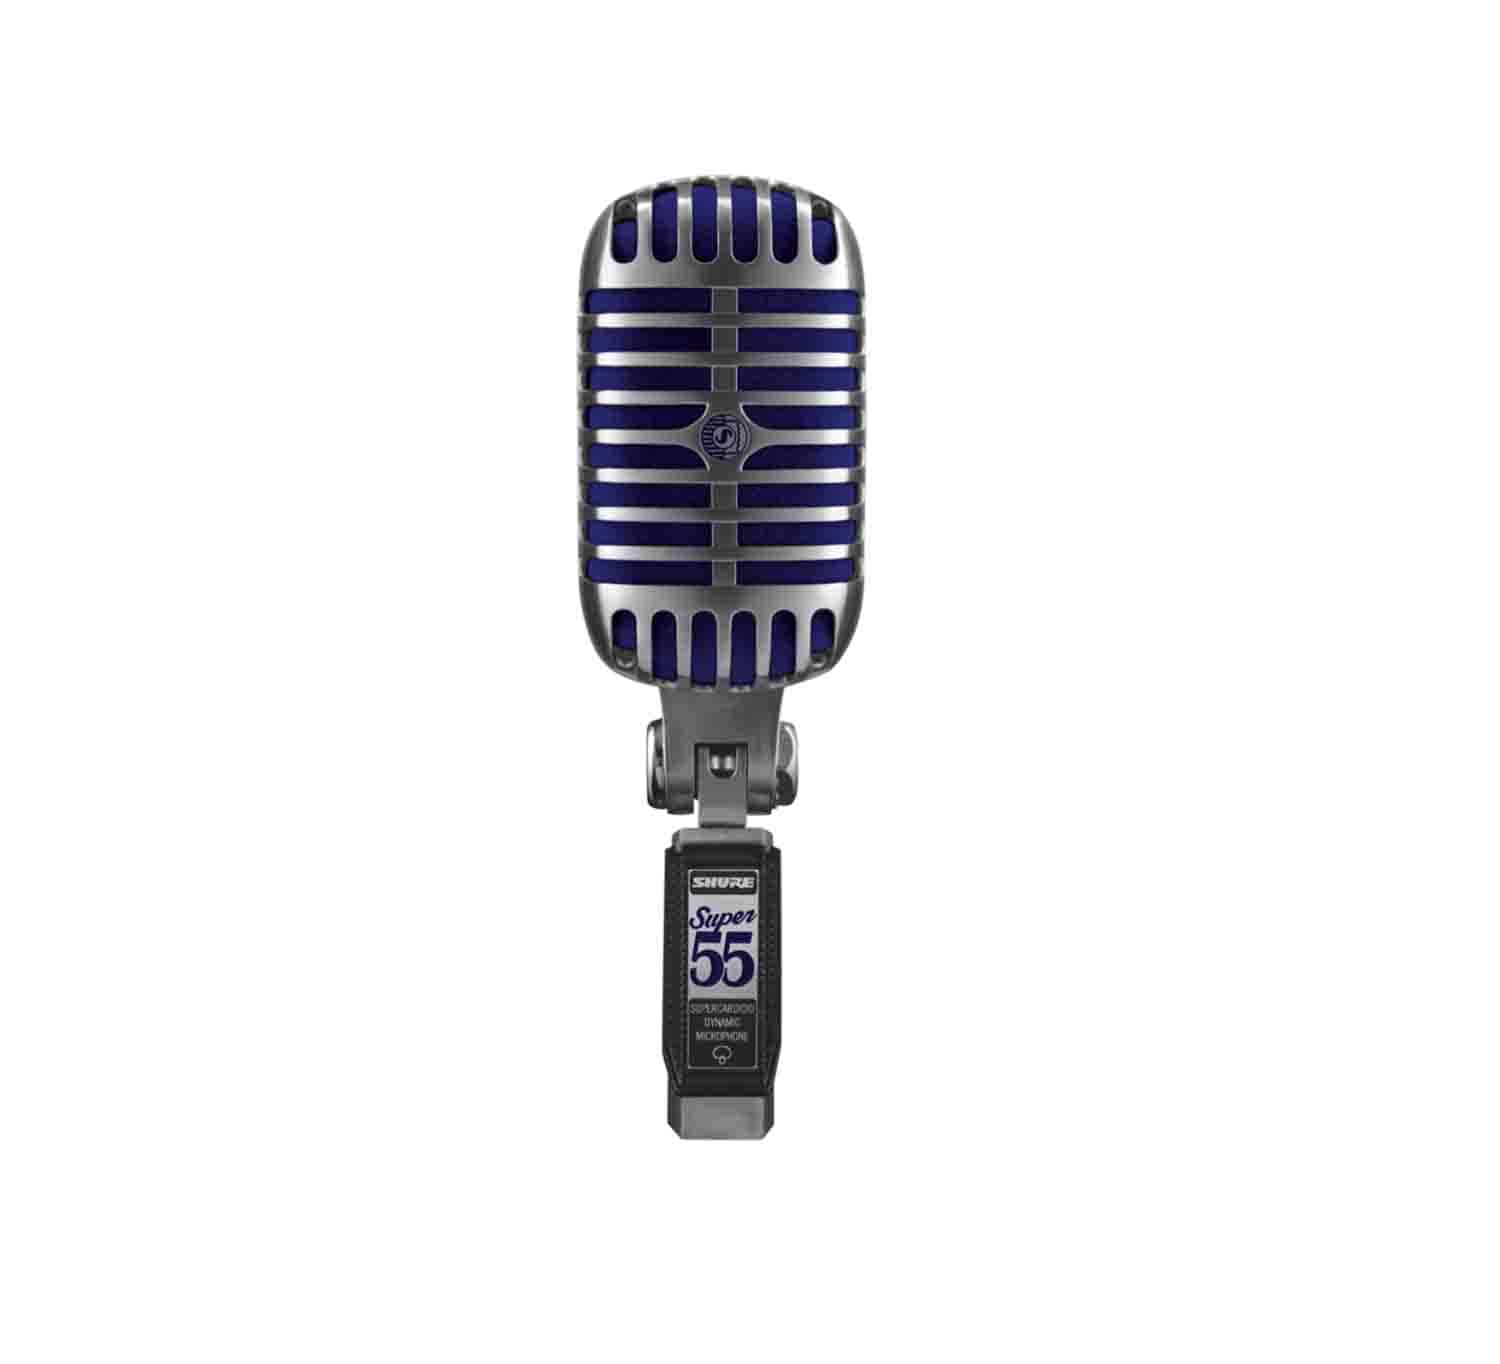 Shure SUPER 55 Deluxe Vocal Microphone - Hollywood DJ